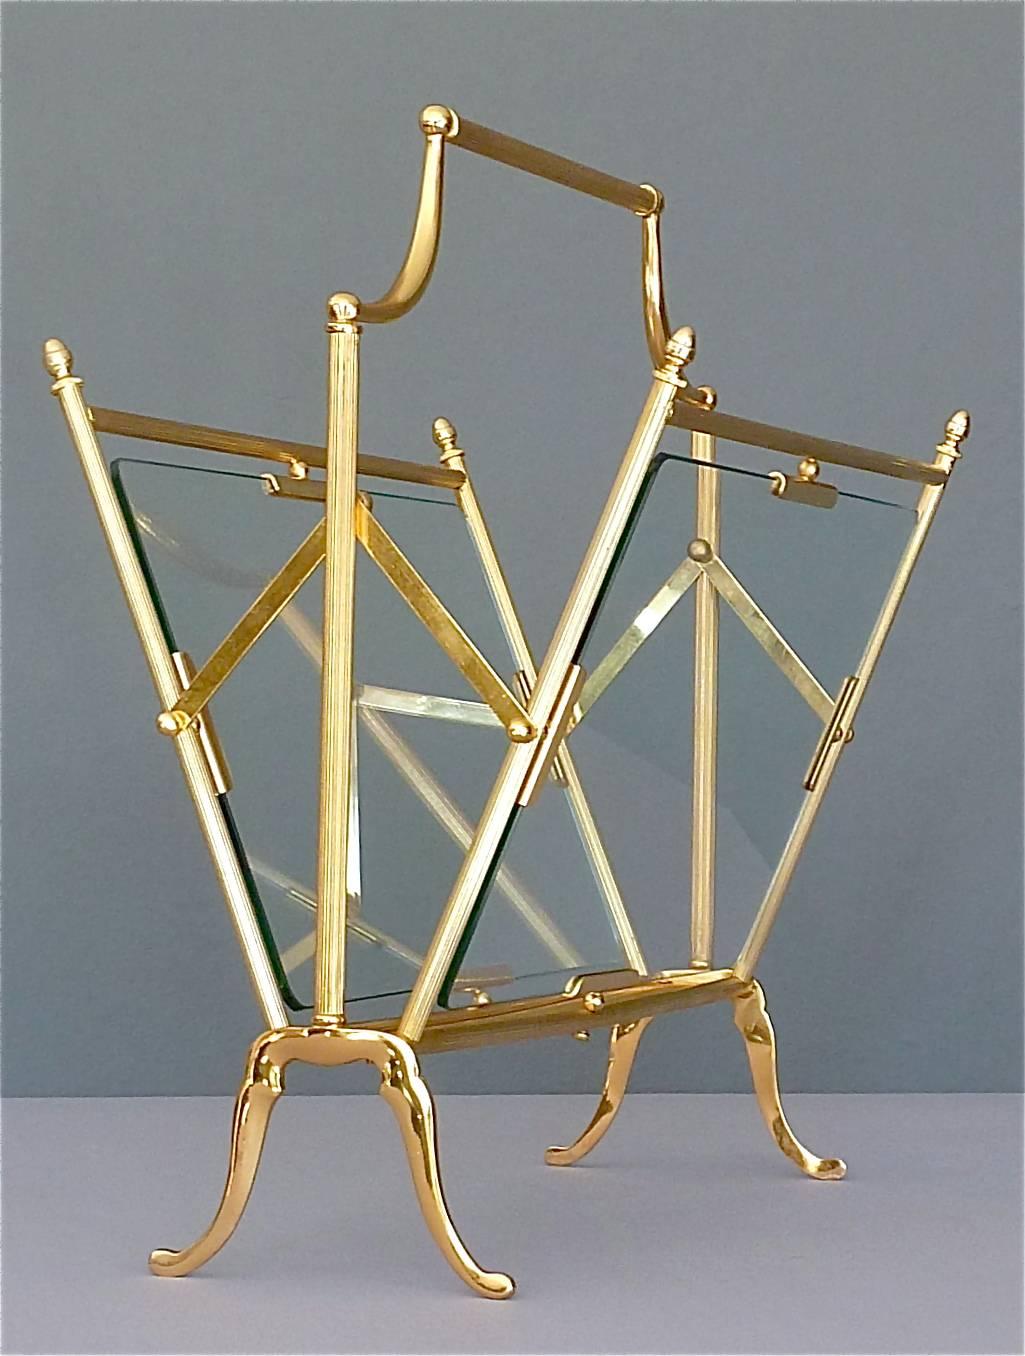 Mid-20th Century Fine Maison Bagues Magazine Holder Stand Rack Gilt Brass Glass France, 1950s For Sale